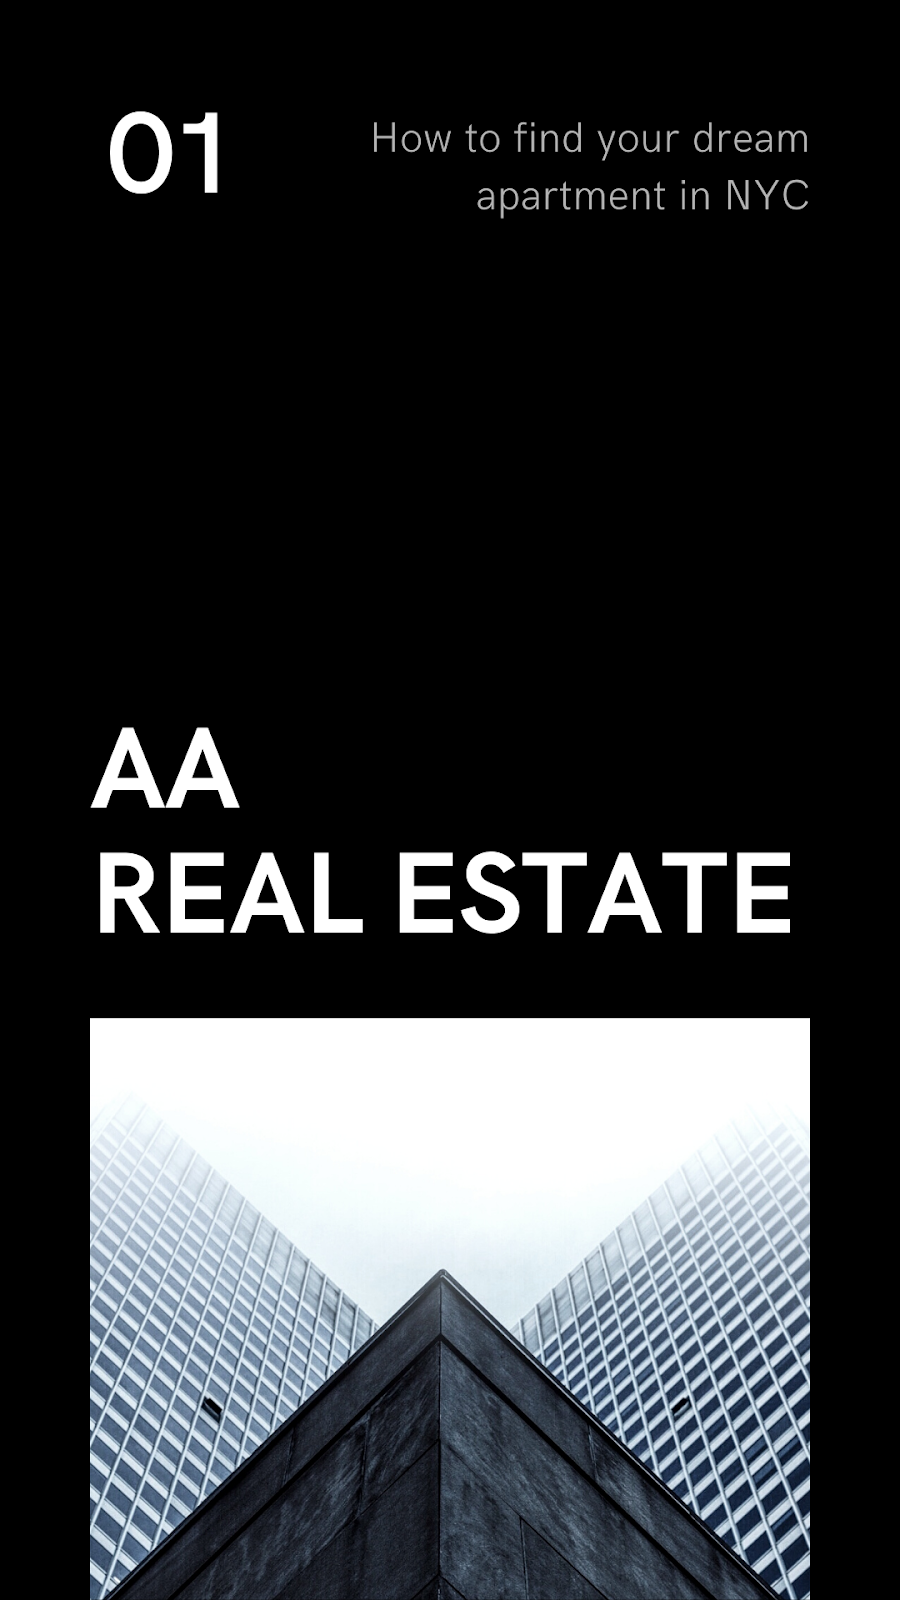 Real Estate Agency NYC